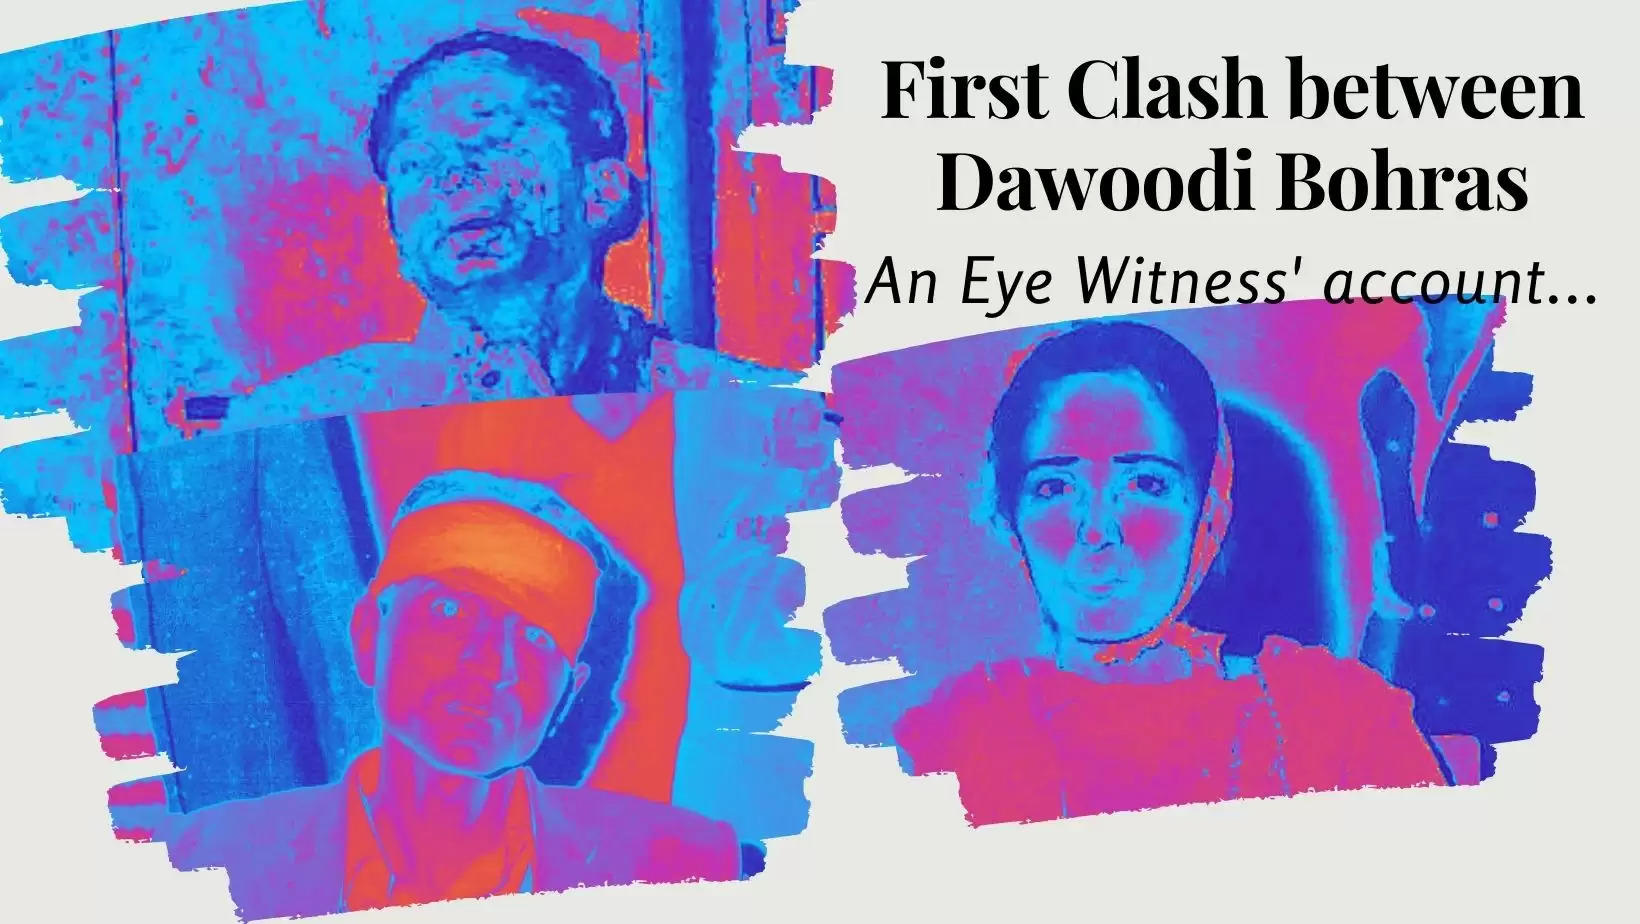 First Clash between Dawoodi Bohras in 1973 An Eye Witness Account, Autocratic Syedna, Bohra High Priest Dictatorship, Bohra Youth Movement